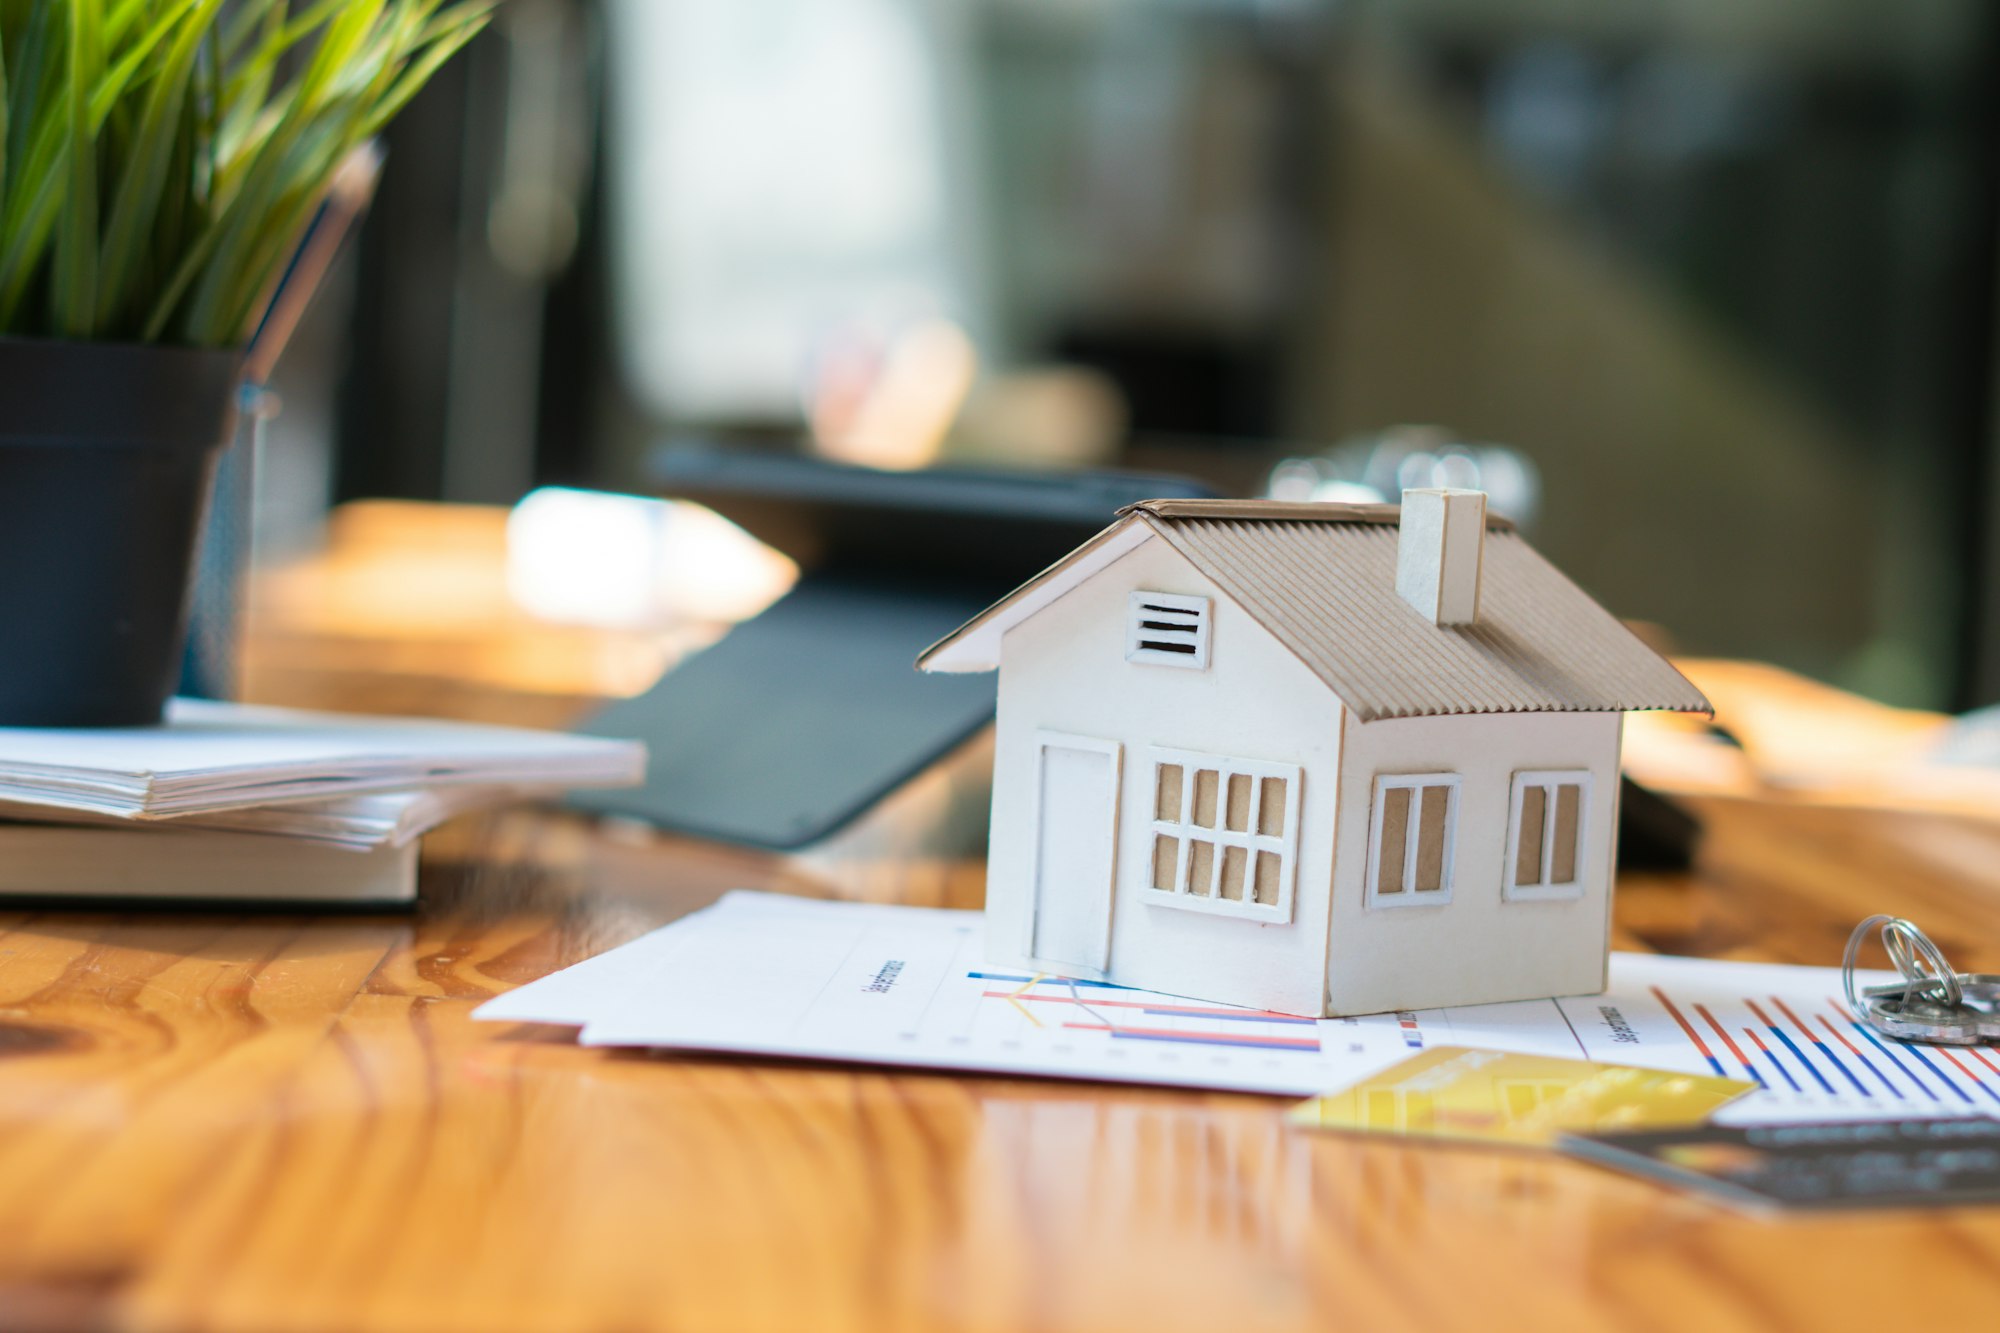 House model - risks of overpricing your home, contracts and wooden table